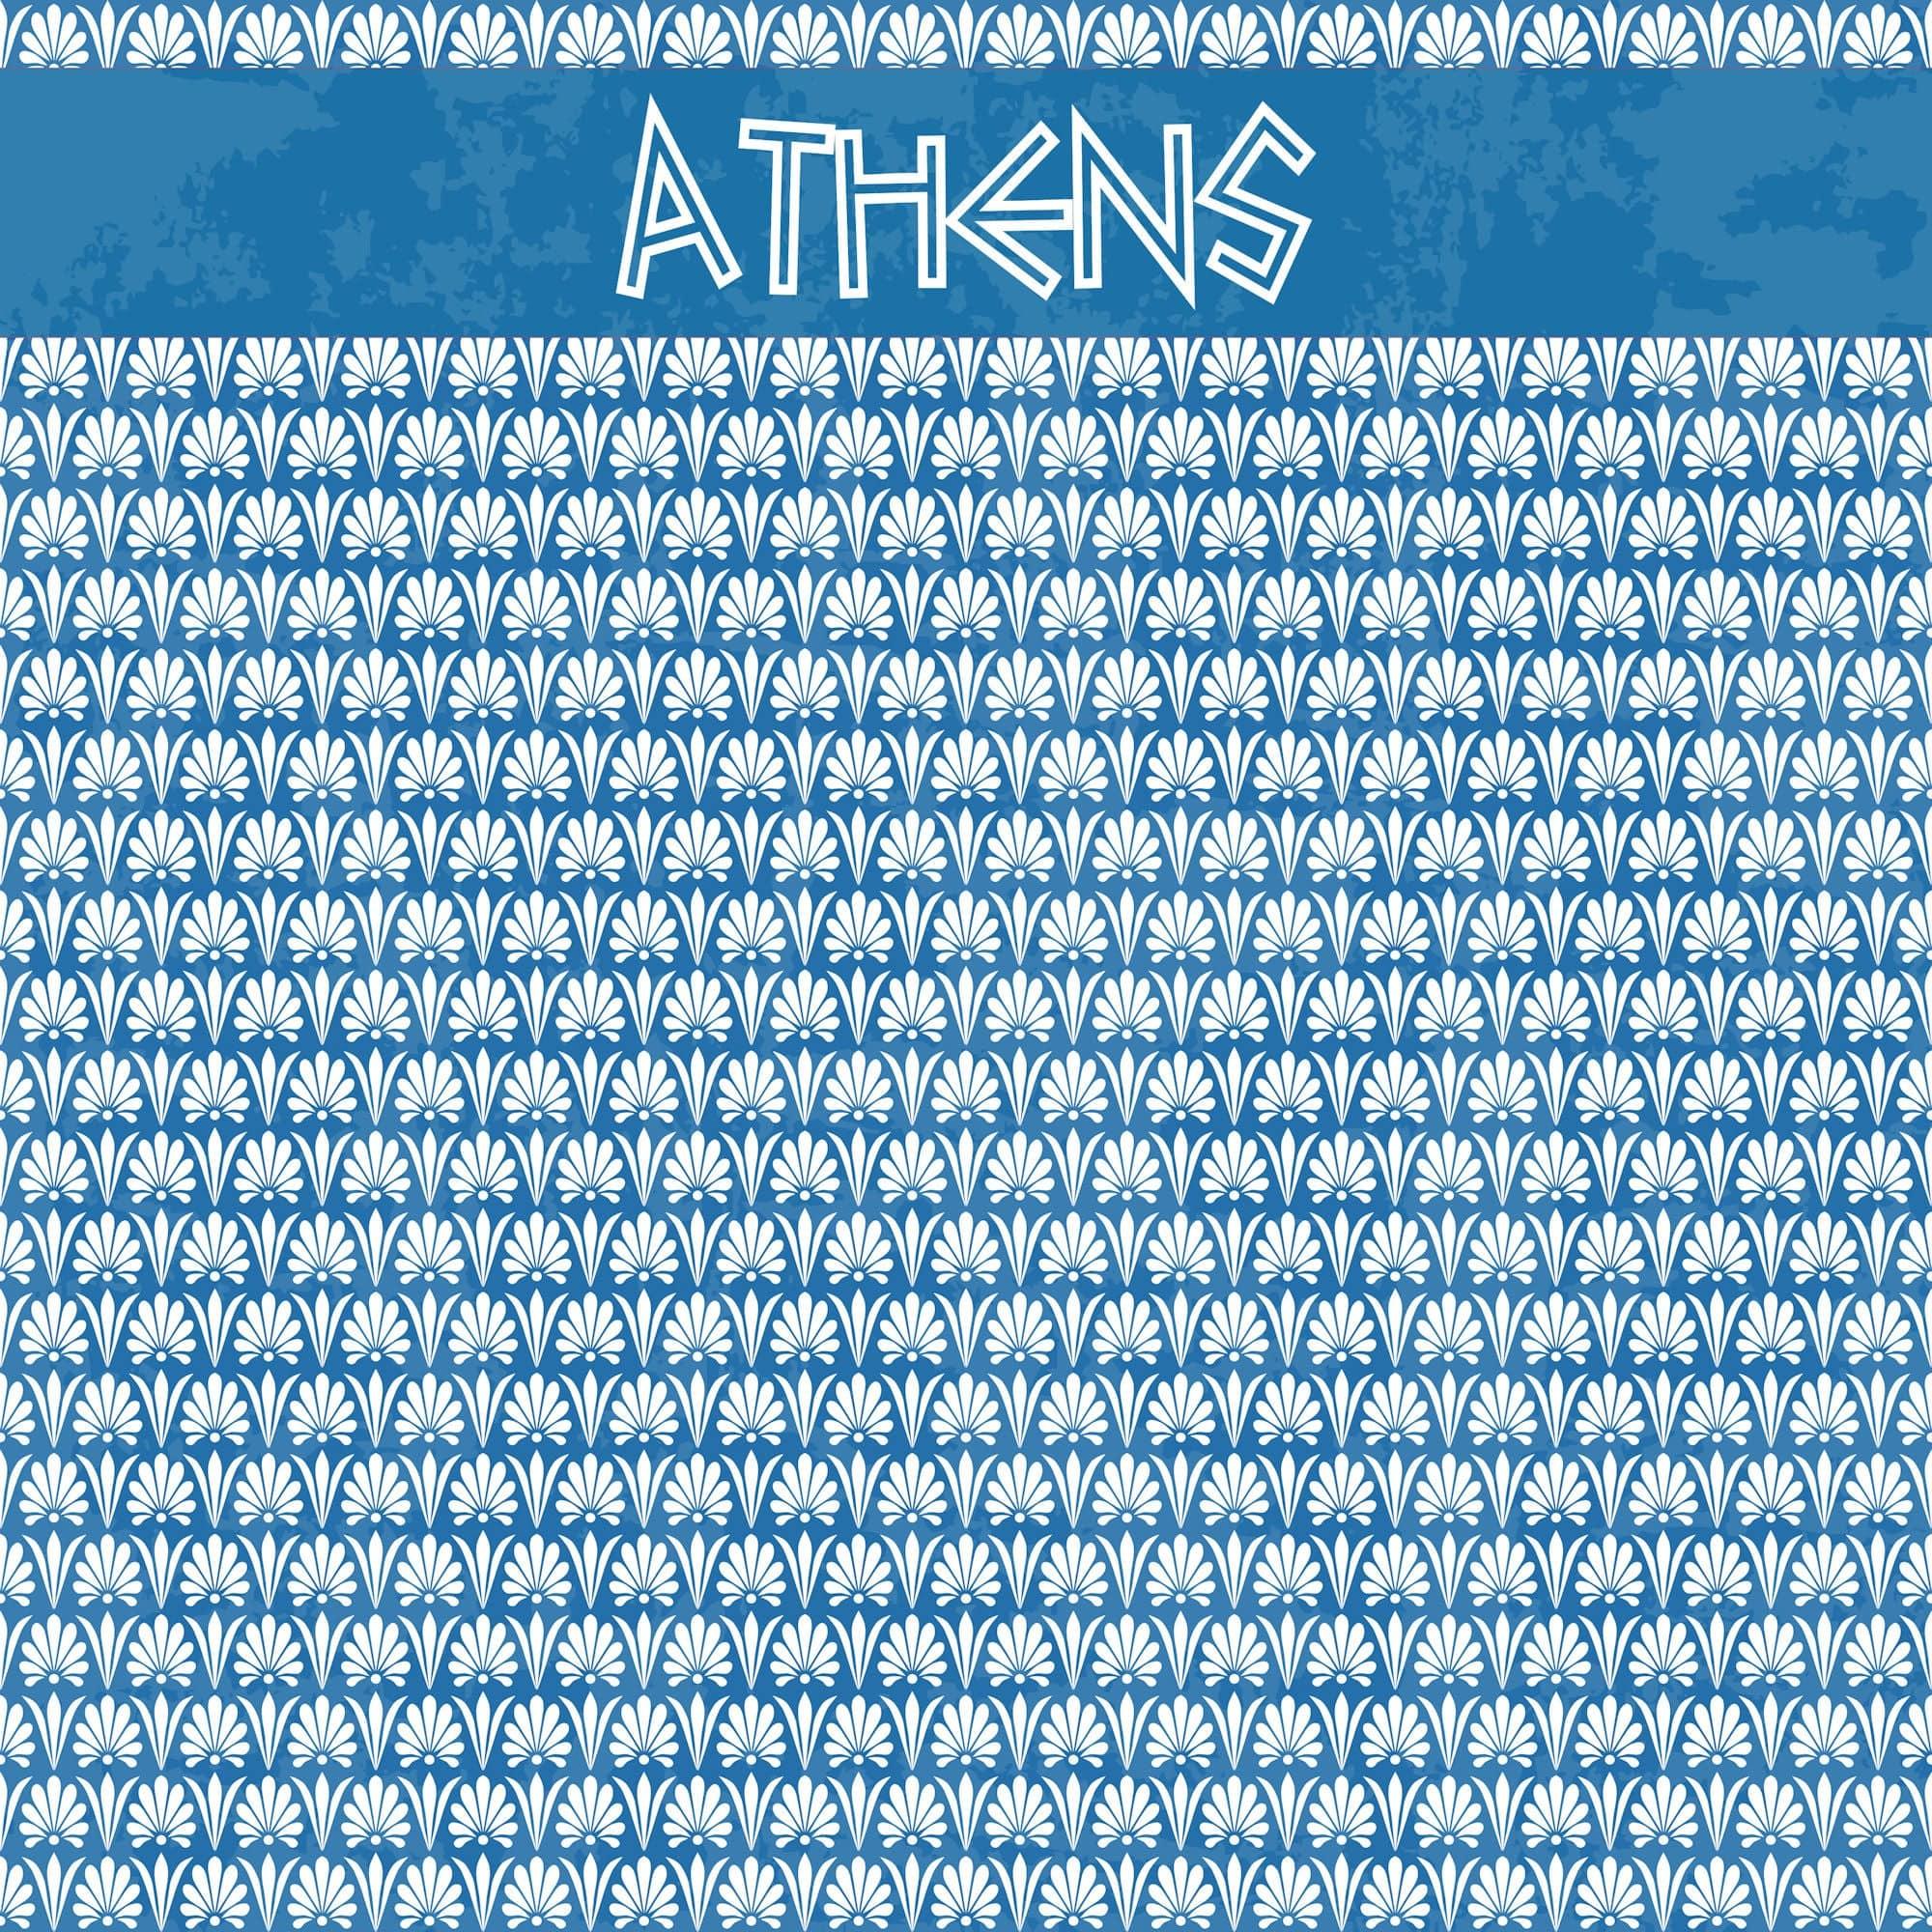 Greece Collection Athens 12 x 12 Double-Sided Scrapbook Paper by SSC Designs - Scrapbook Supply Companies